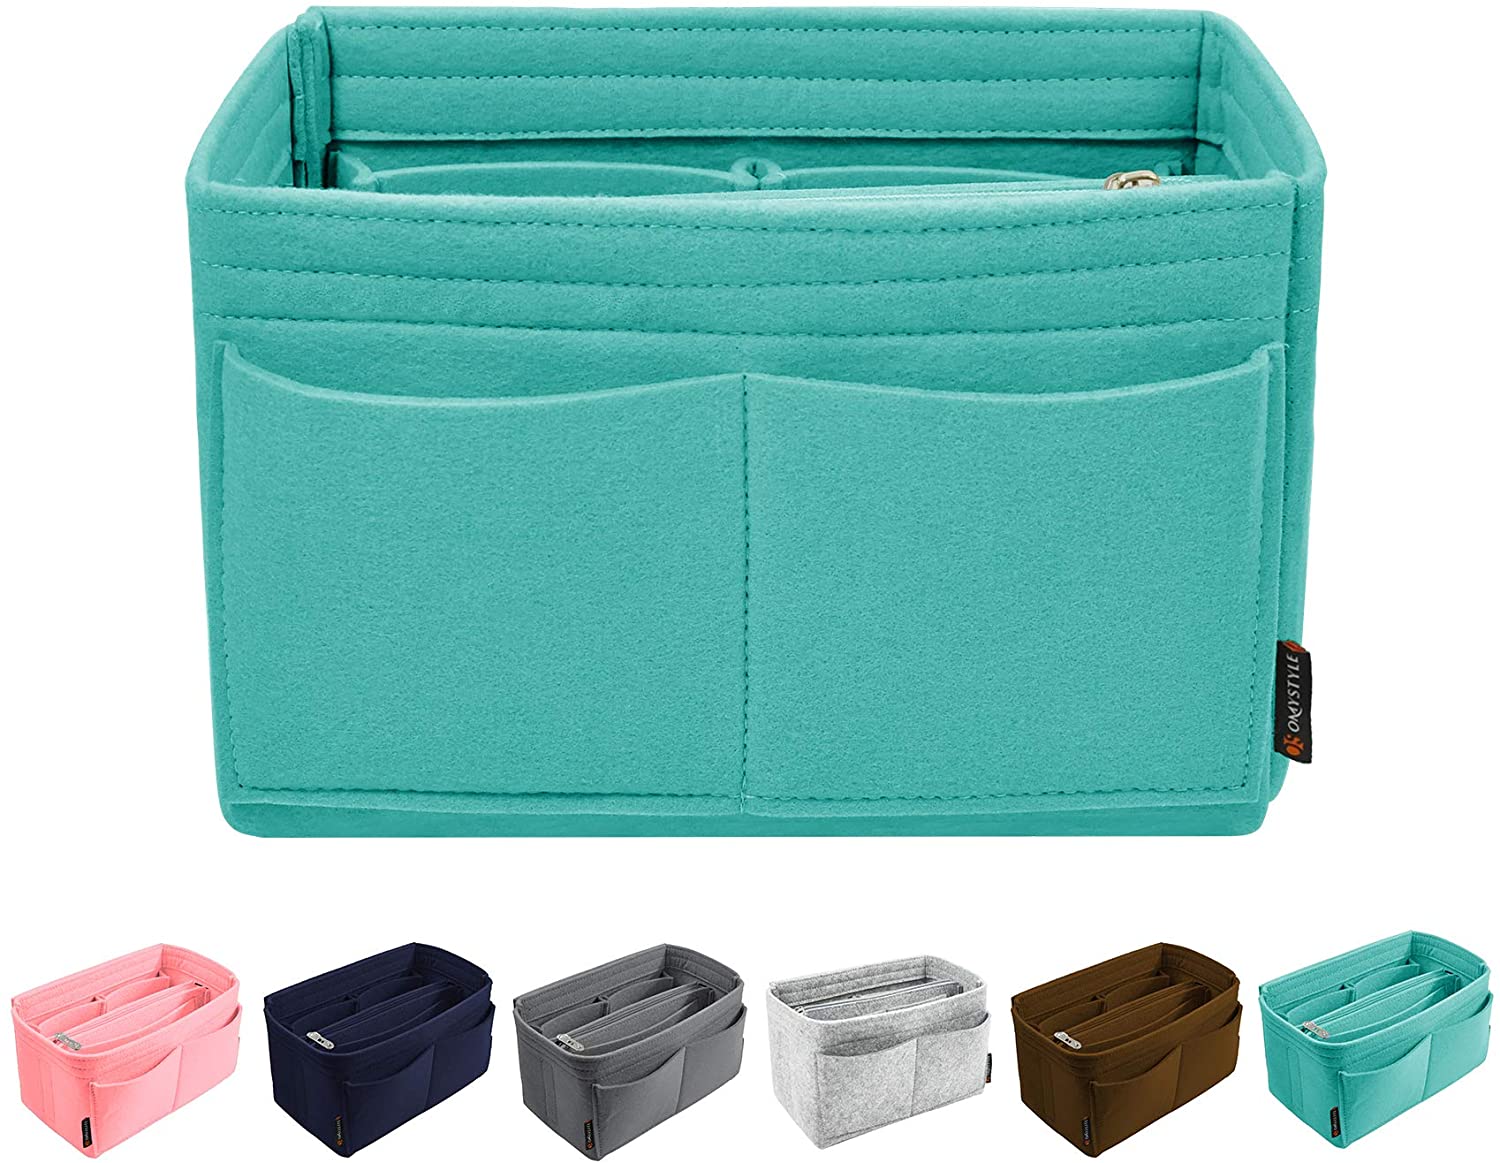  OMYSTYLE Purse Organizer Insert for Handbags, Felt Bag  Organizer for Tote & Purse, Tote Bag Organizer Insert with 5 Sizes,  Compatible with